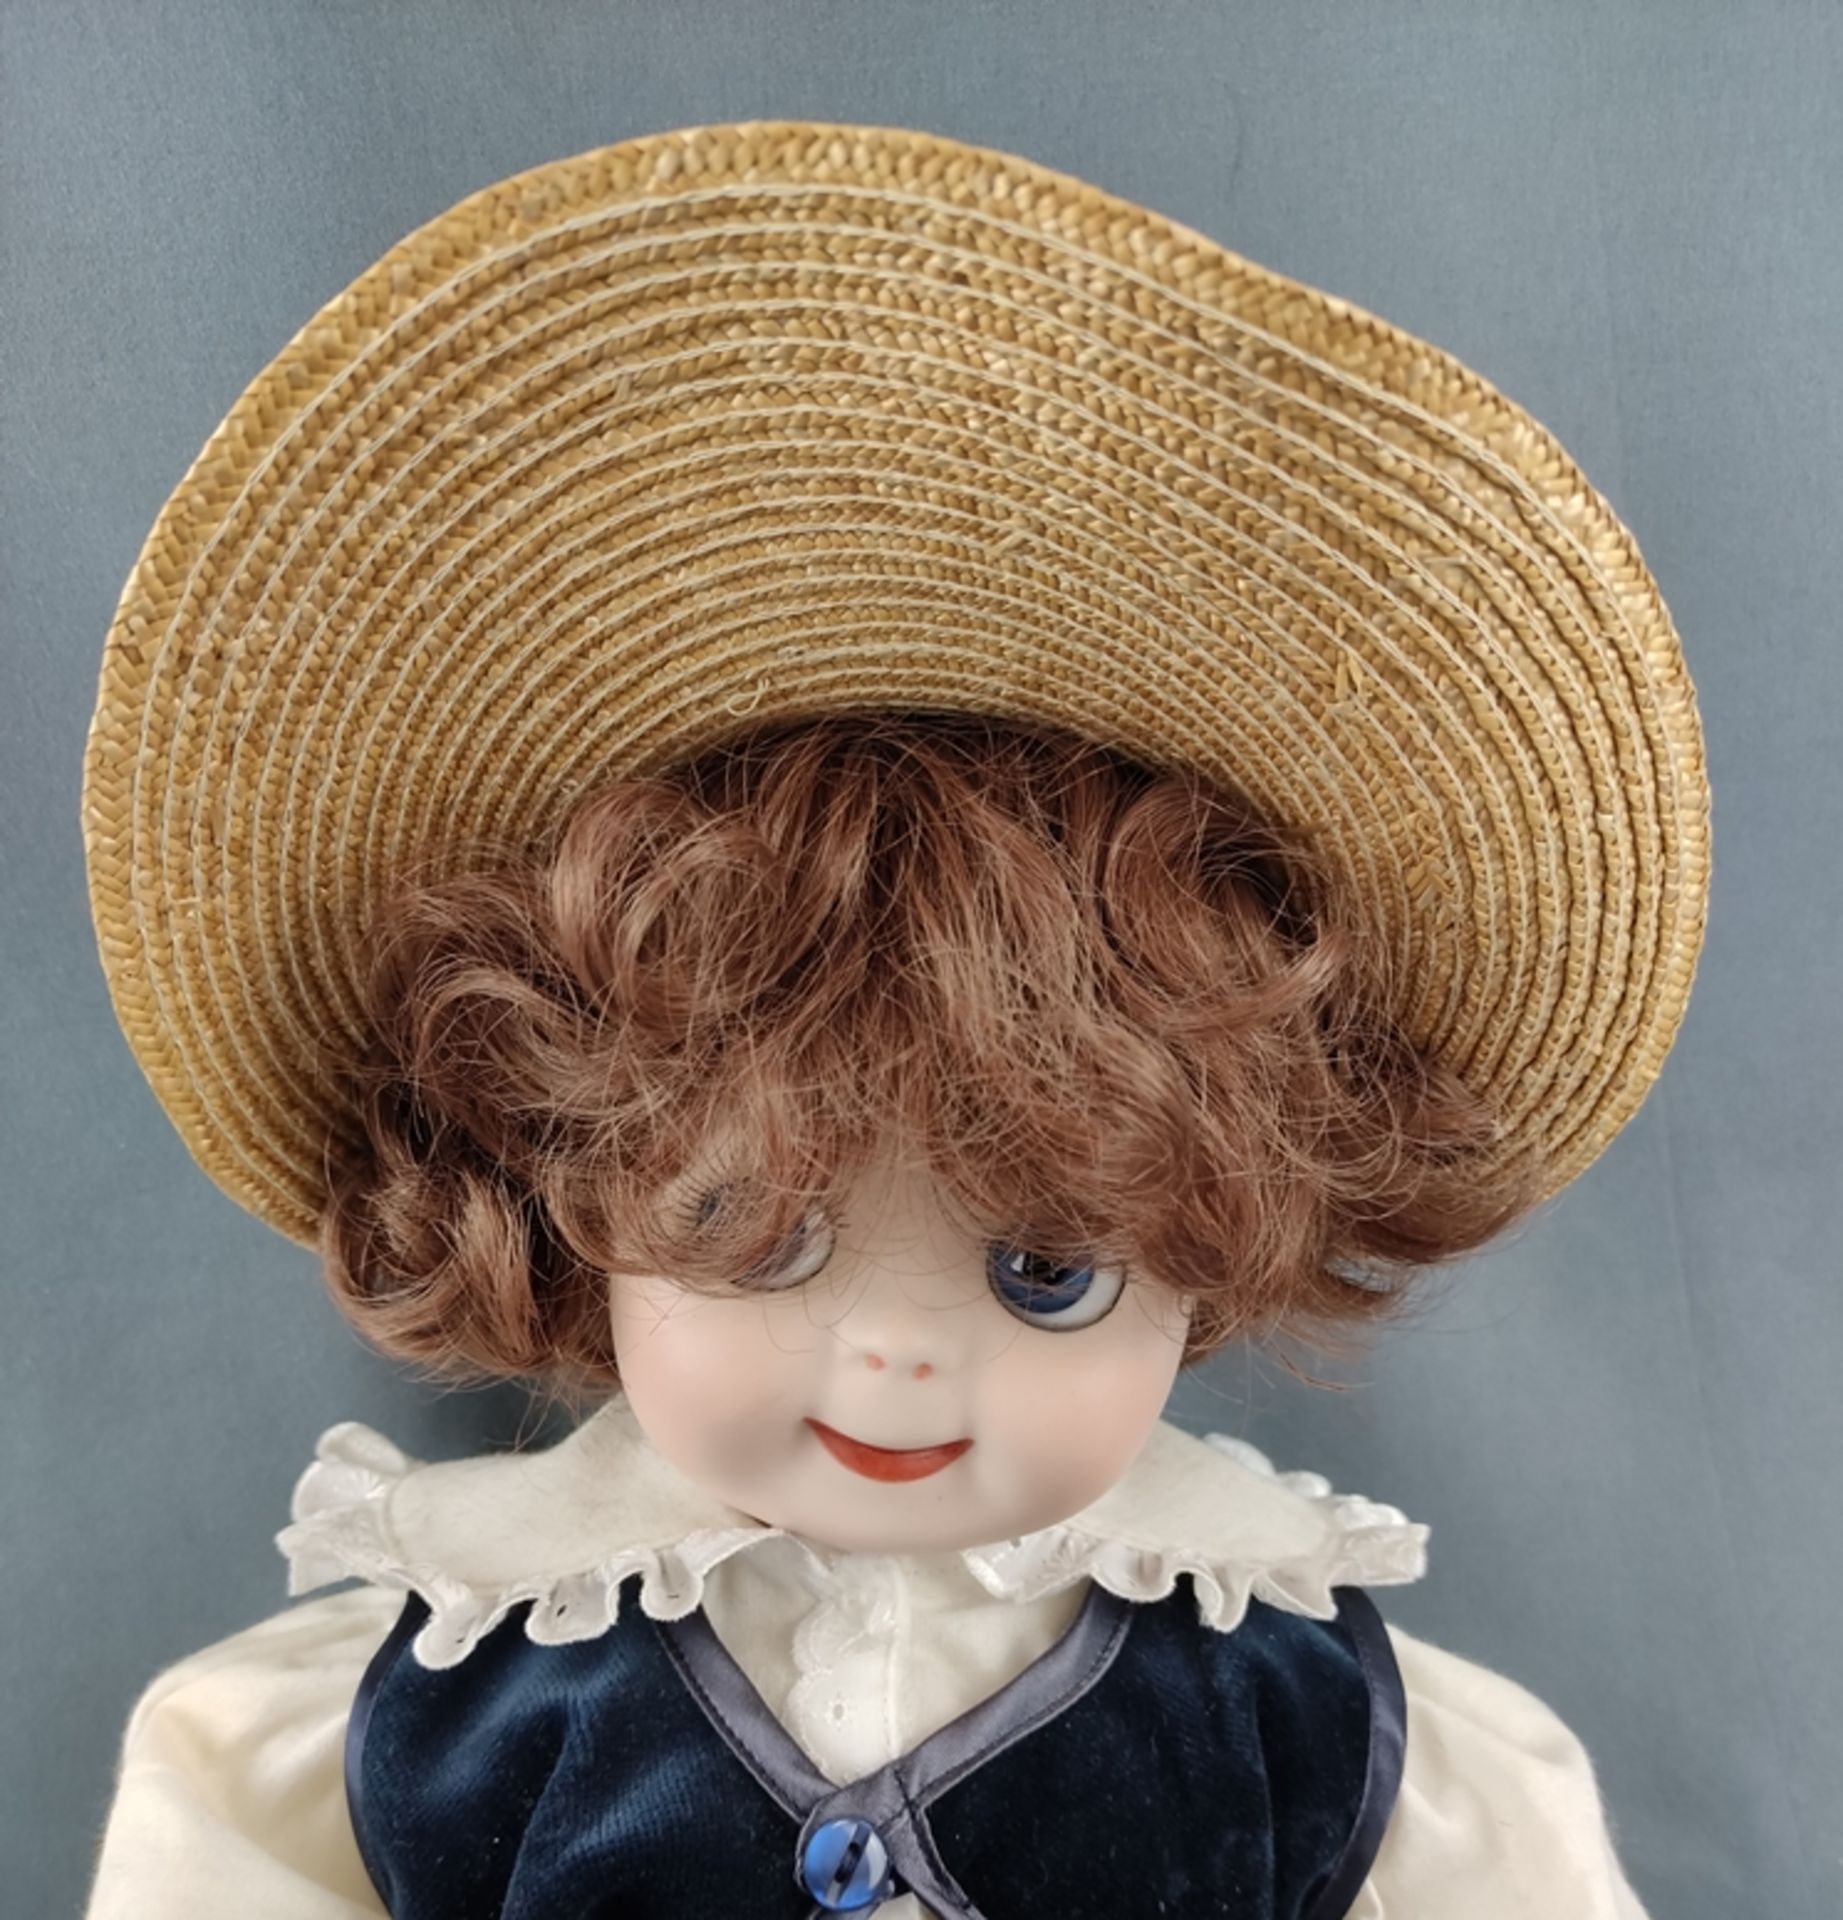 Doll "Googlie" by J.D. Kestner, with big blue eyes and closed melon mouth, brown curly wig and stra - Image 5 of 5